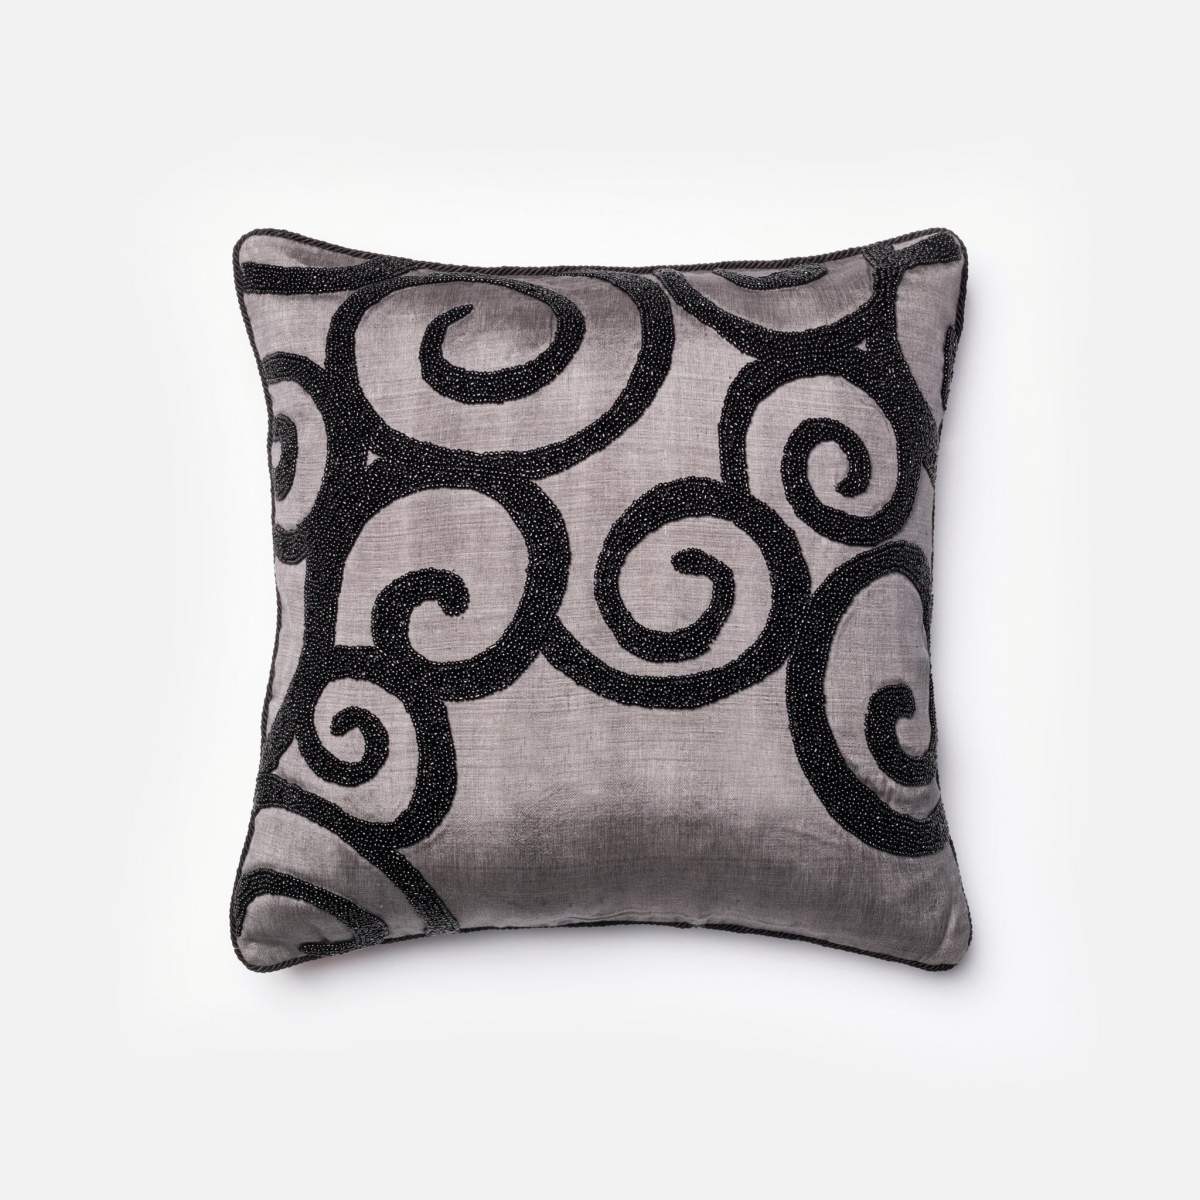 Dsetp0010gyblpil1 18 X 18 In. Contemporary Down Insert Decorative Pillow - Grey & Black